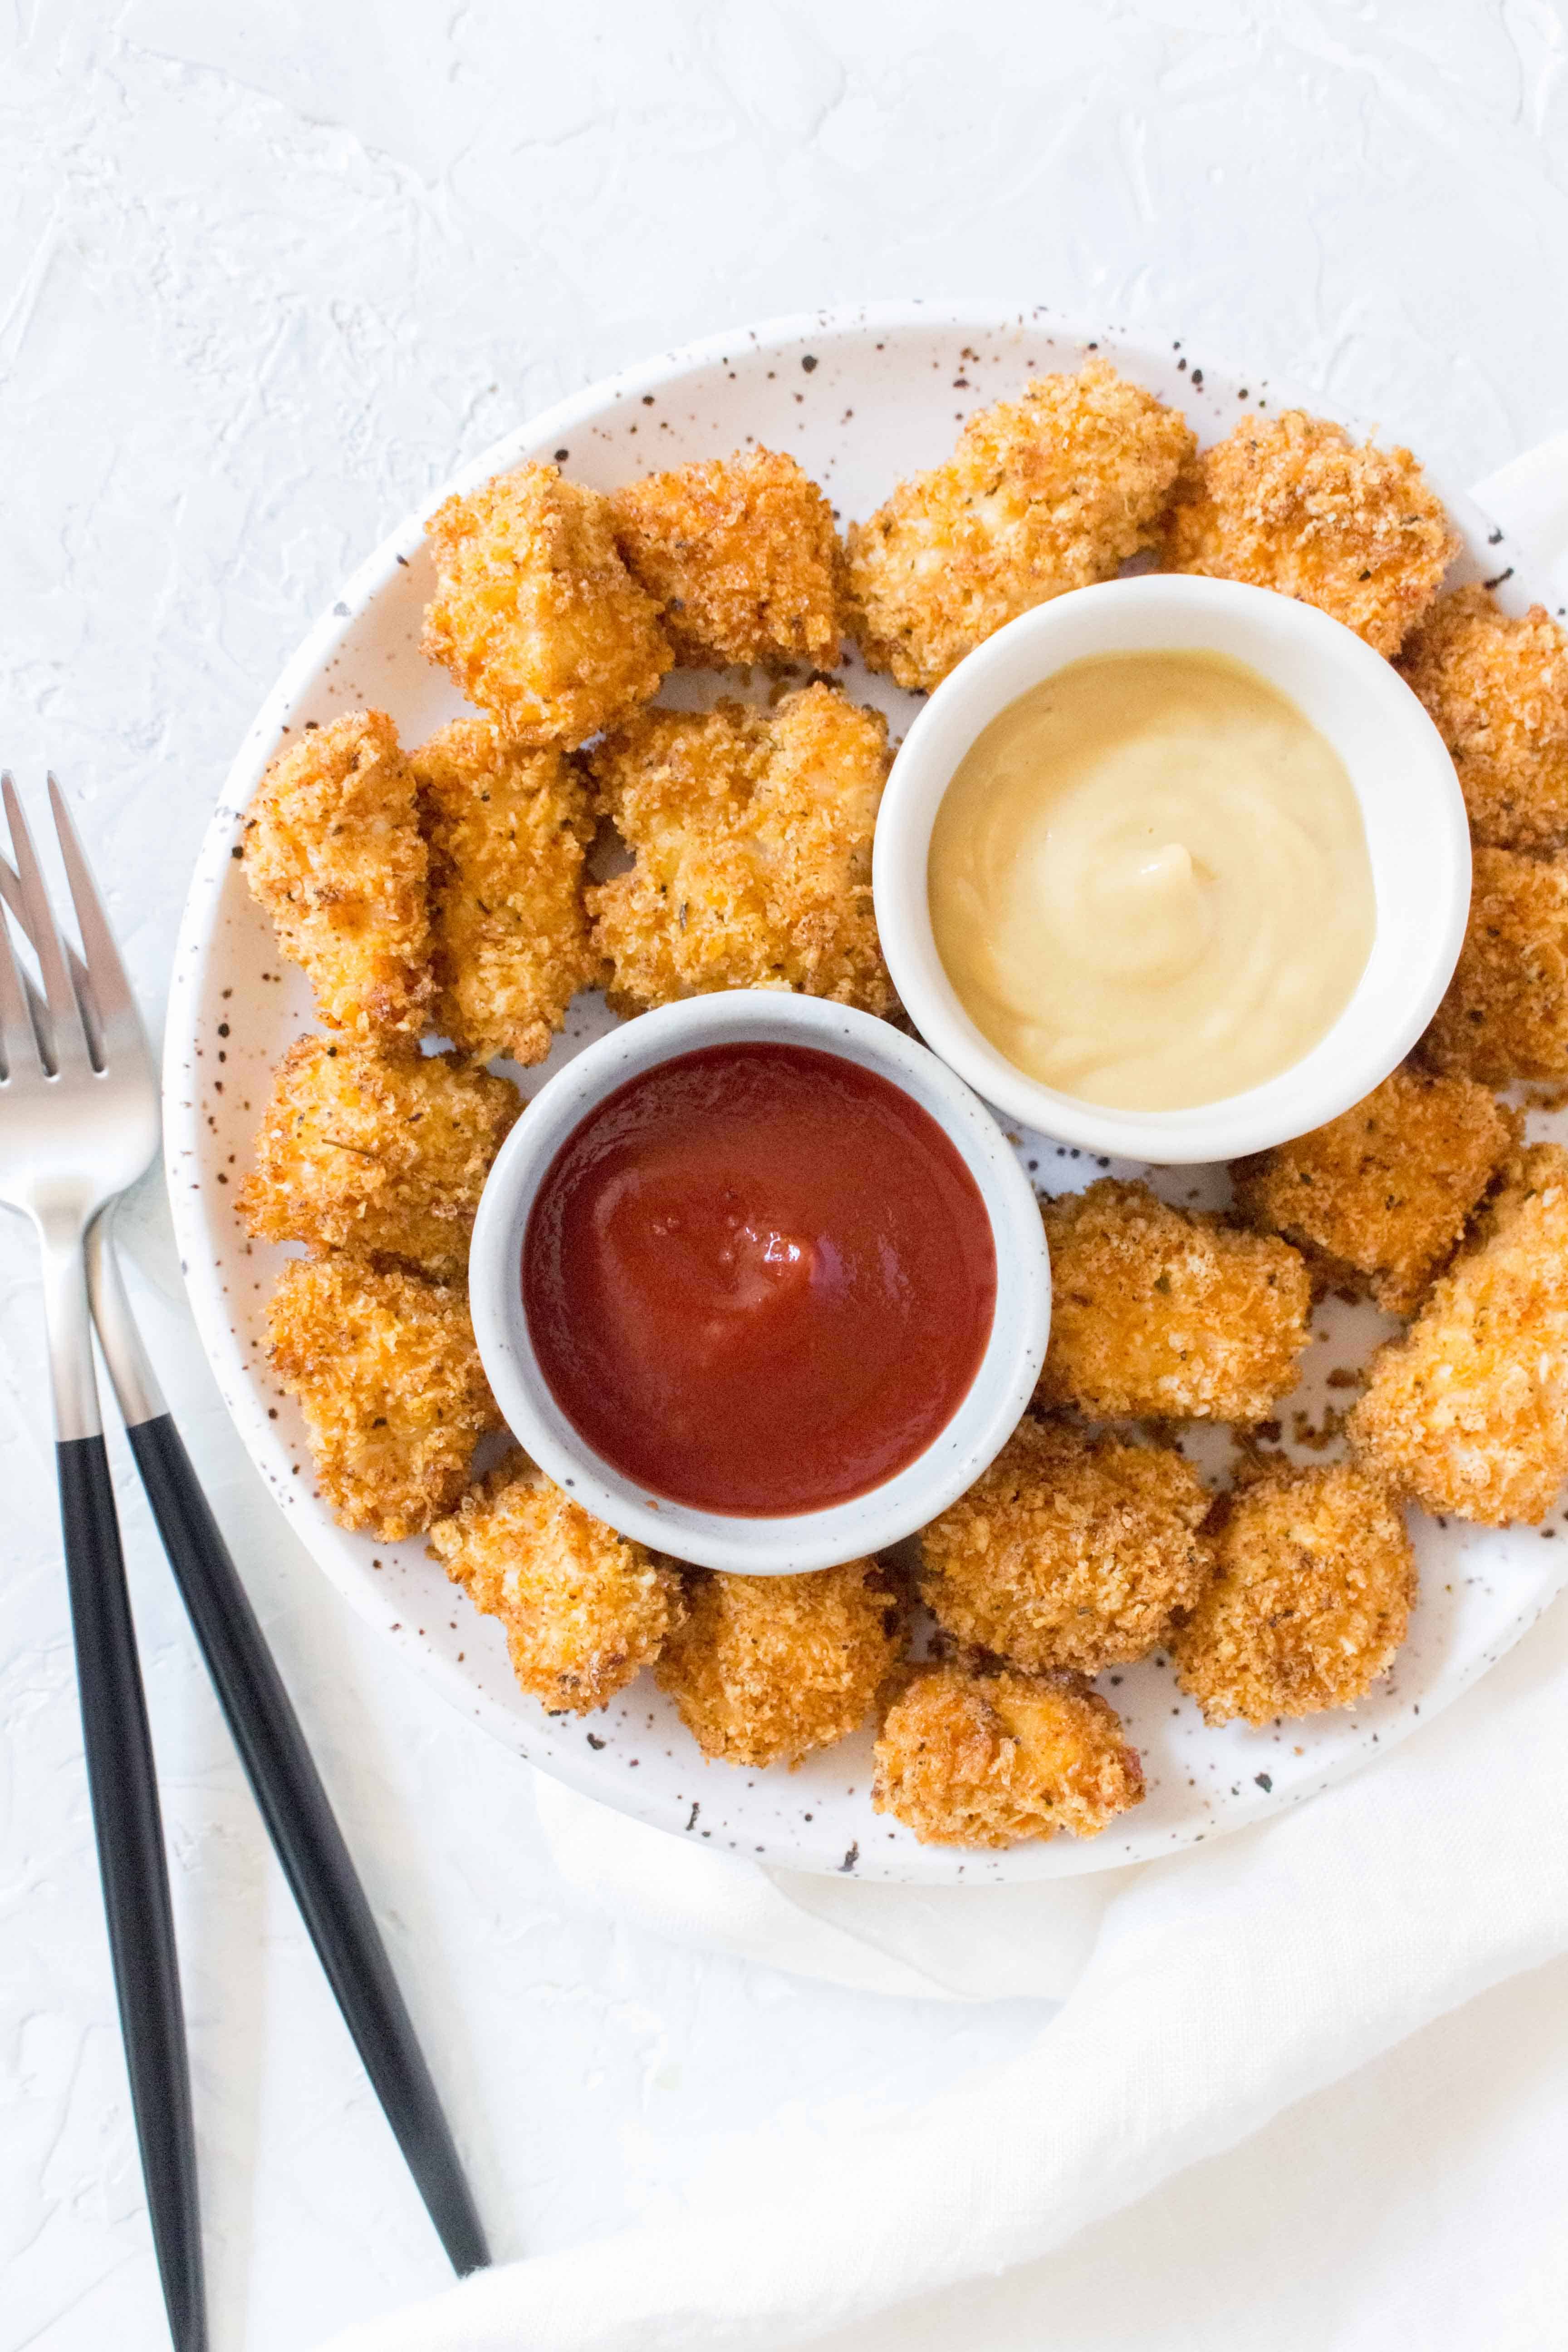 Swap out your frozen store bought chicken nuggets and make these super easy Homemade Air Fryer Chicken Nuggets instead!